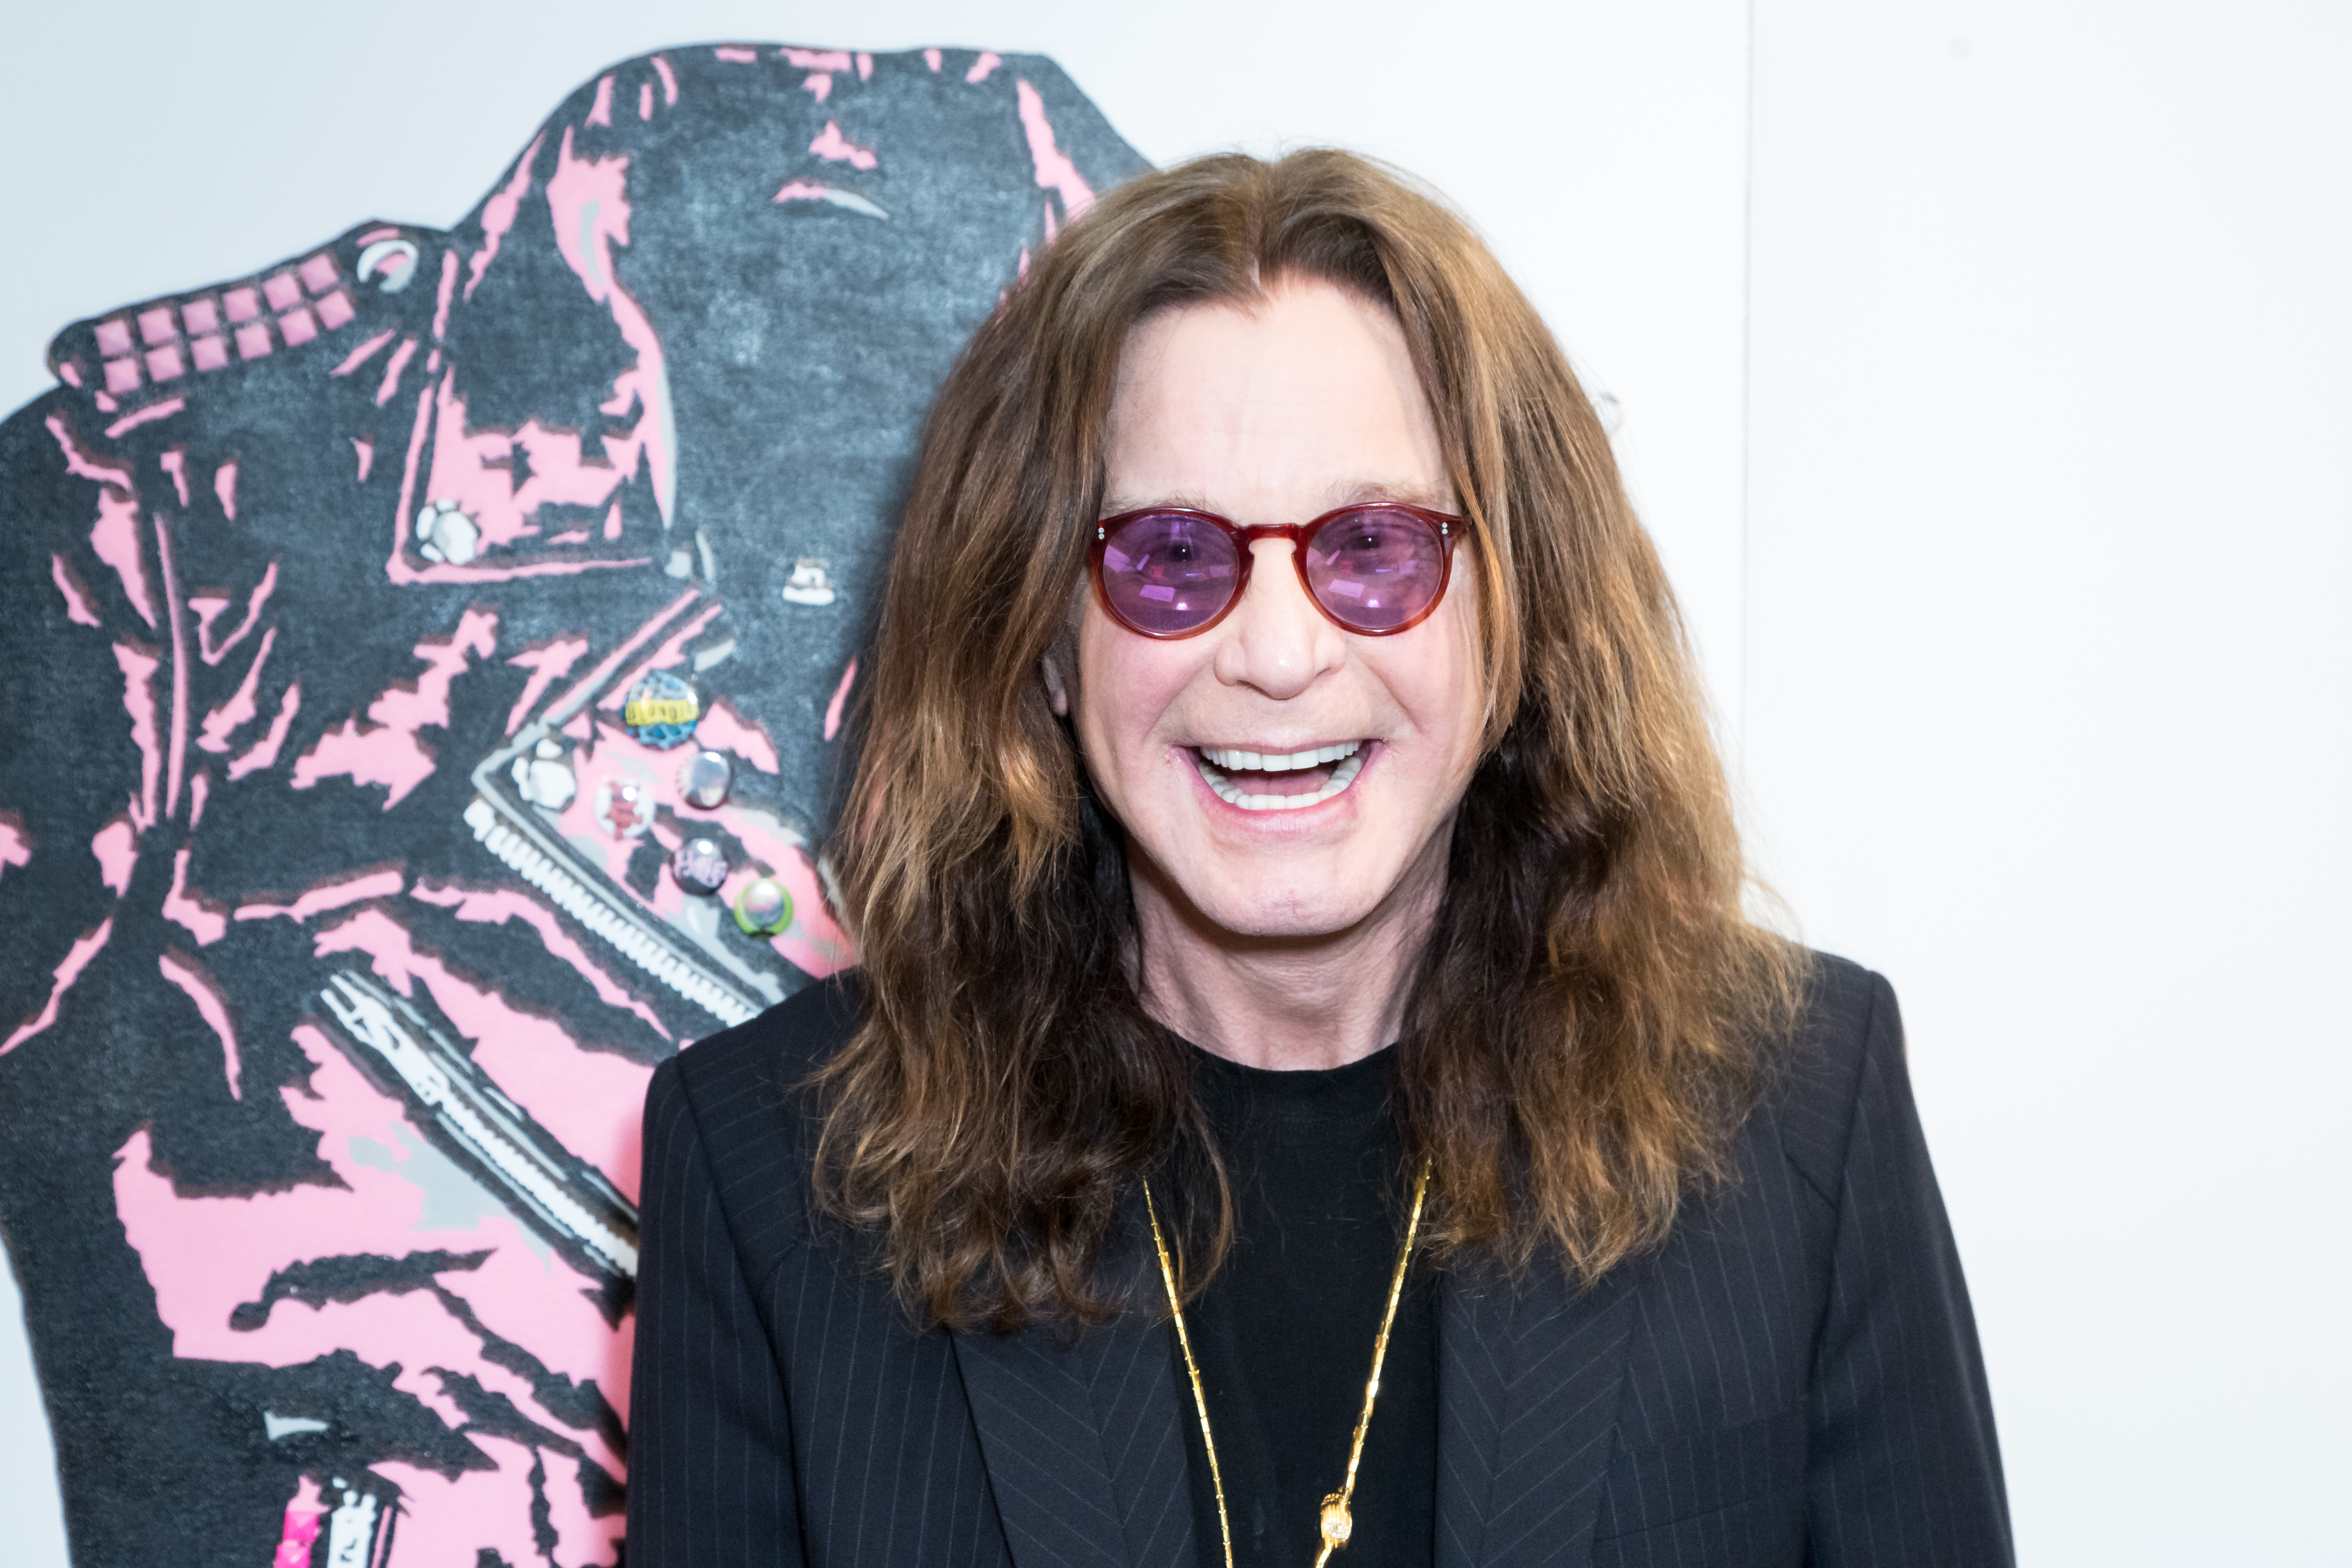 Ozzy Osbourne at Elisabeth Weinstock on September 28, 2017 in Los Angeles, California. | Source: Getty Images